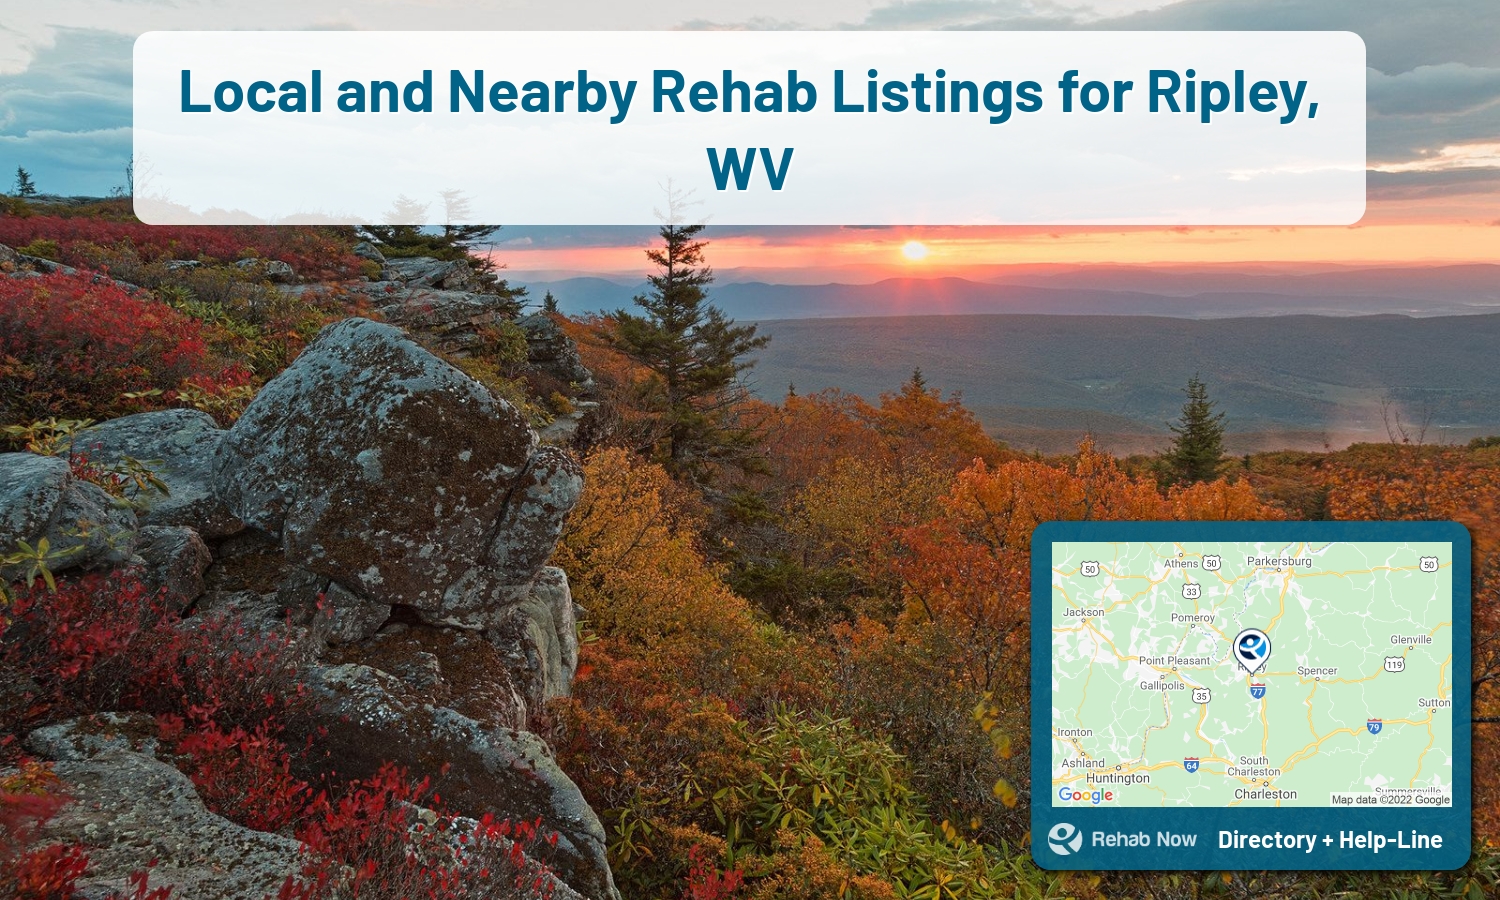 Find drug rehab and alcohol treatment services in Ripley. Our experts help you find a center in Ripley, West Virginia